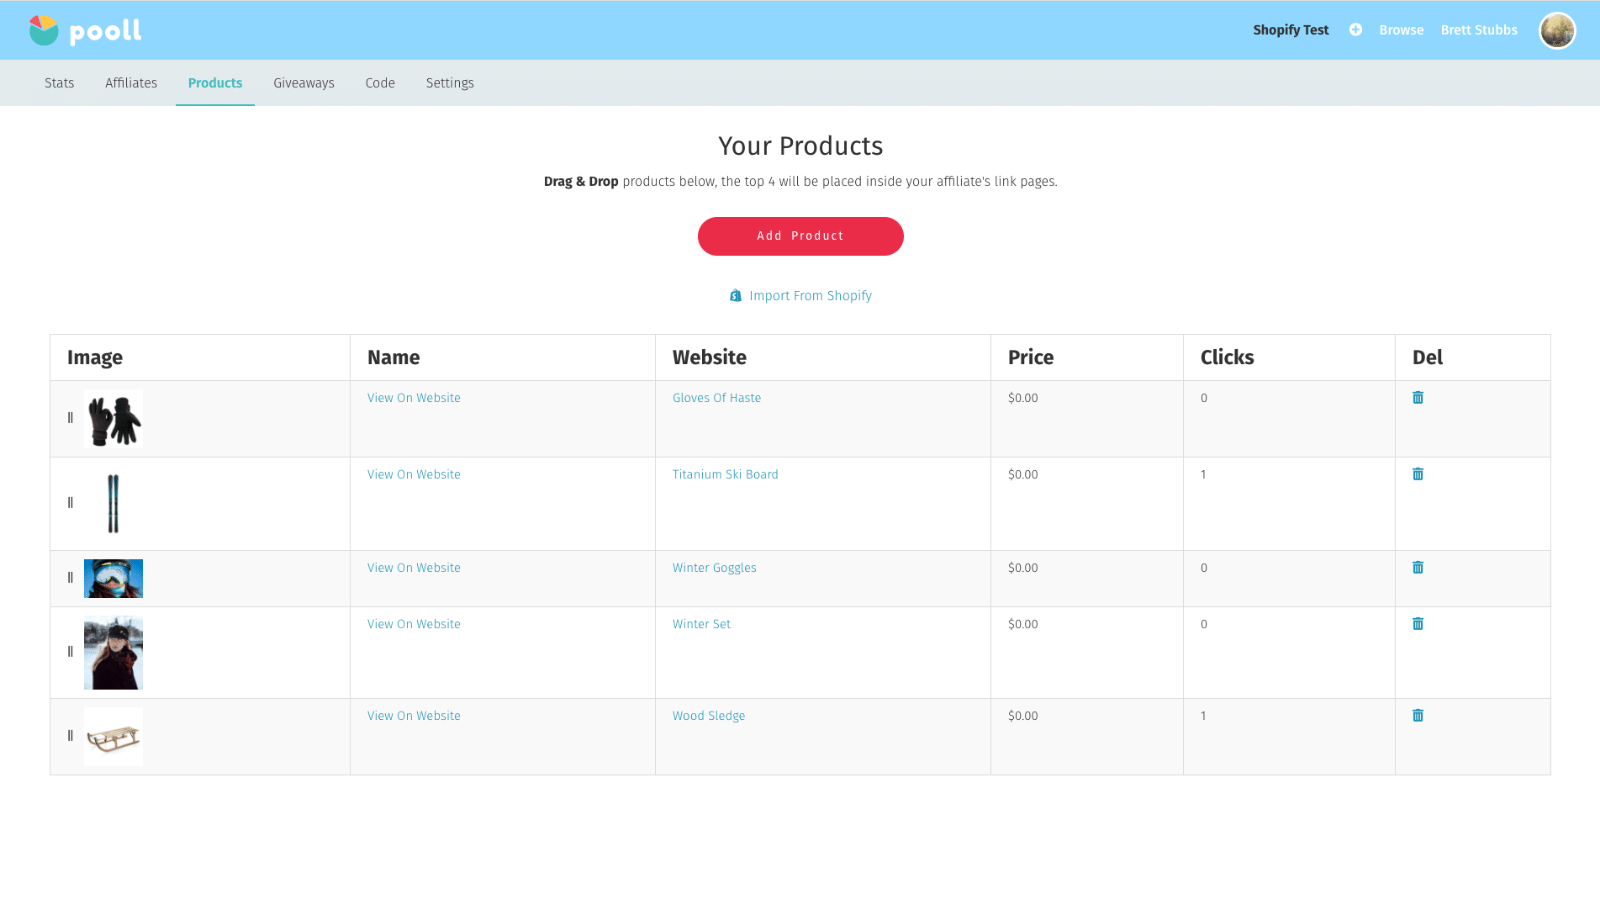 Merchants: Products To List On Link Pages